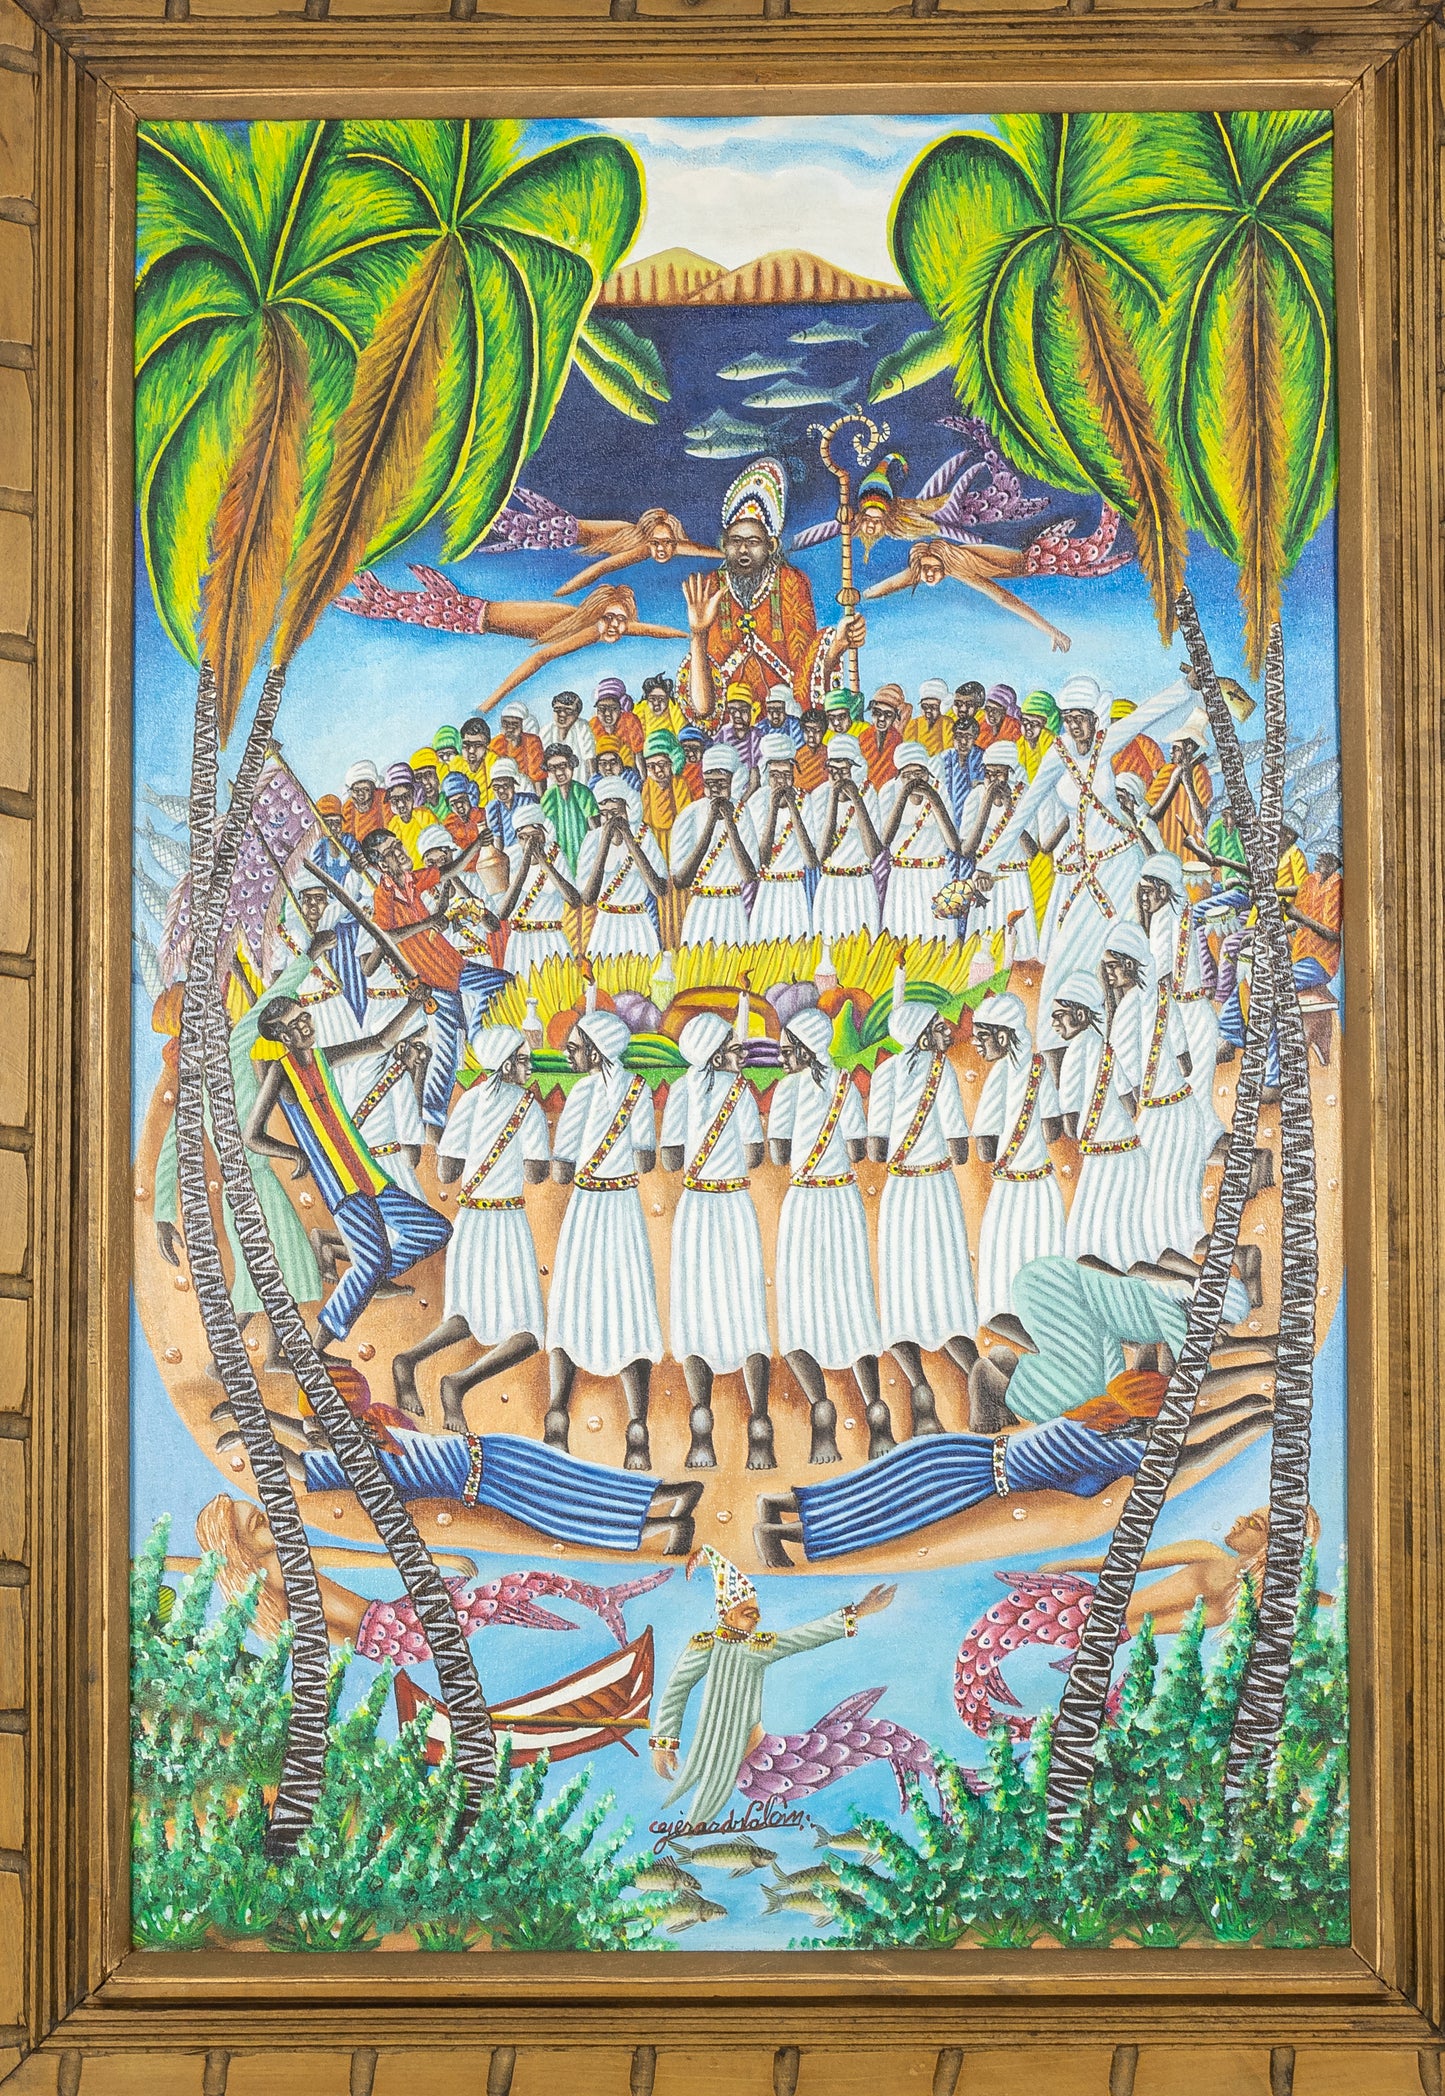 Gerard Valcin (1925-1988) 35"x24" Voodoo Procession c1980 Oil on Canvas Framed Painting #13SS